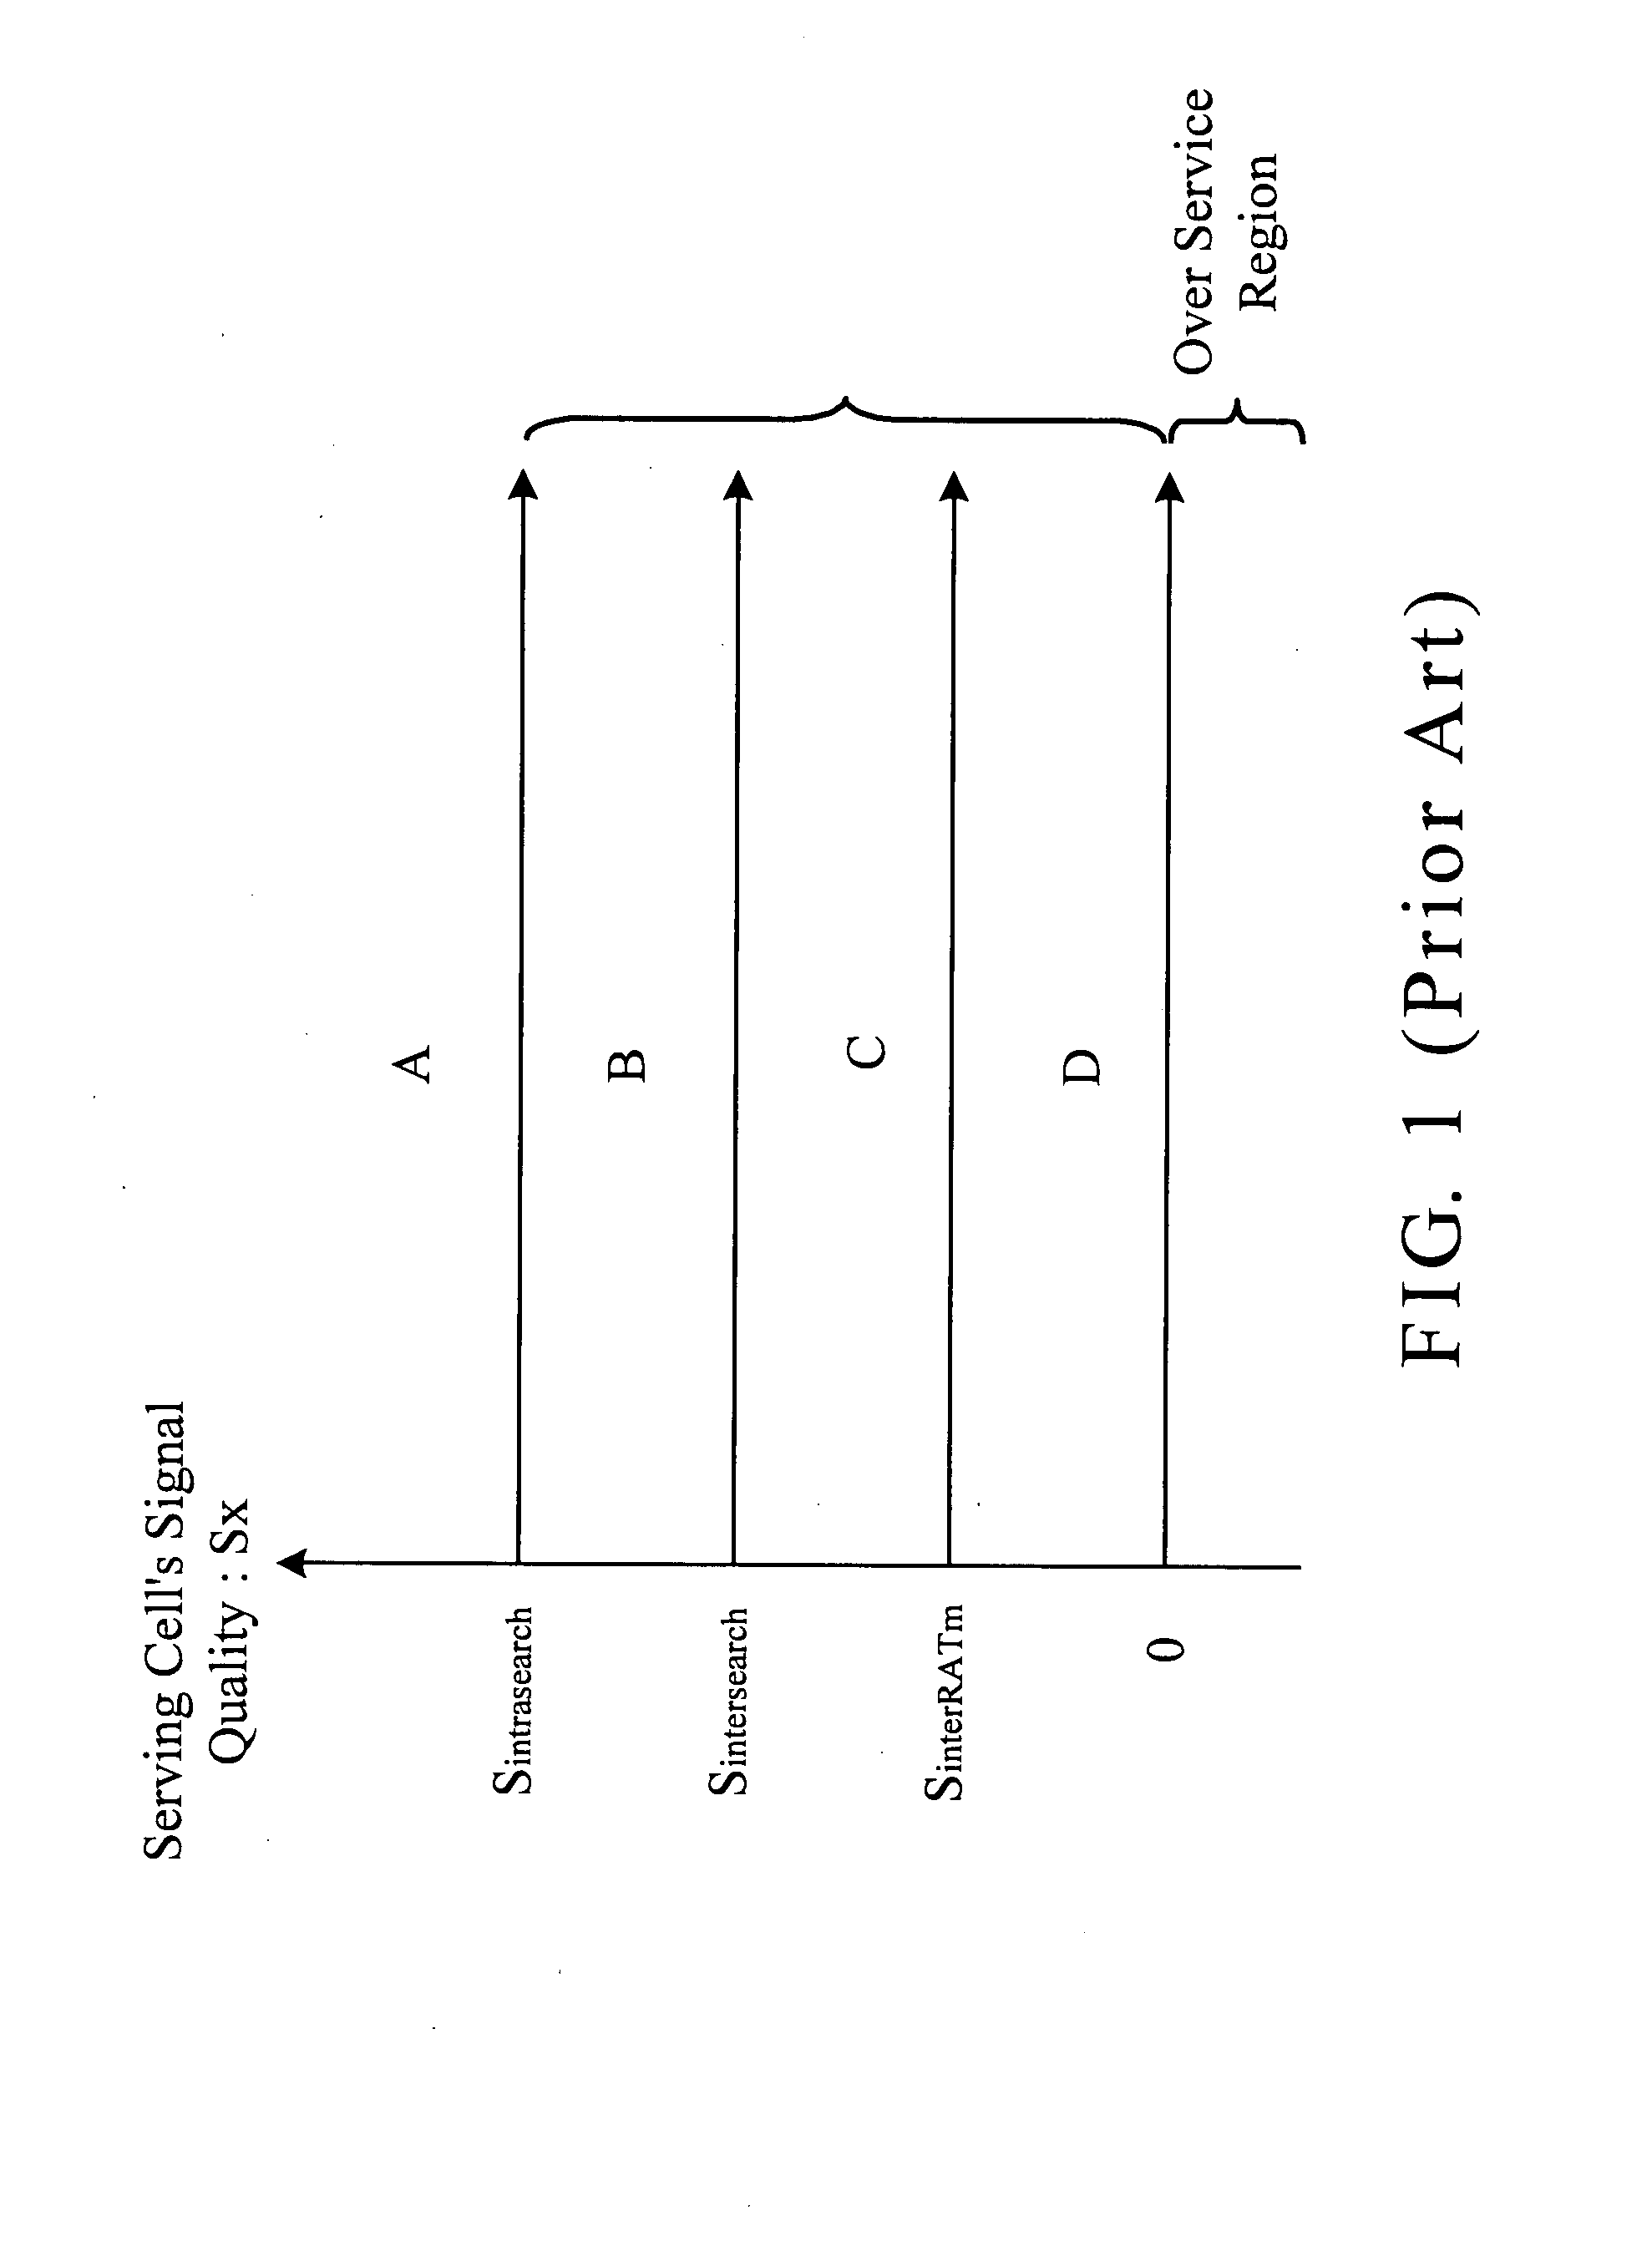 Cell reselection method and system using an active measurement set in a mobile communication